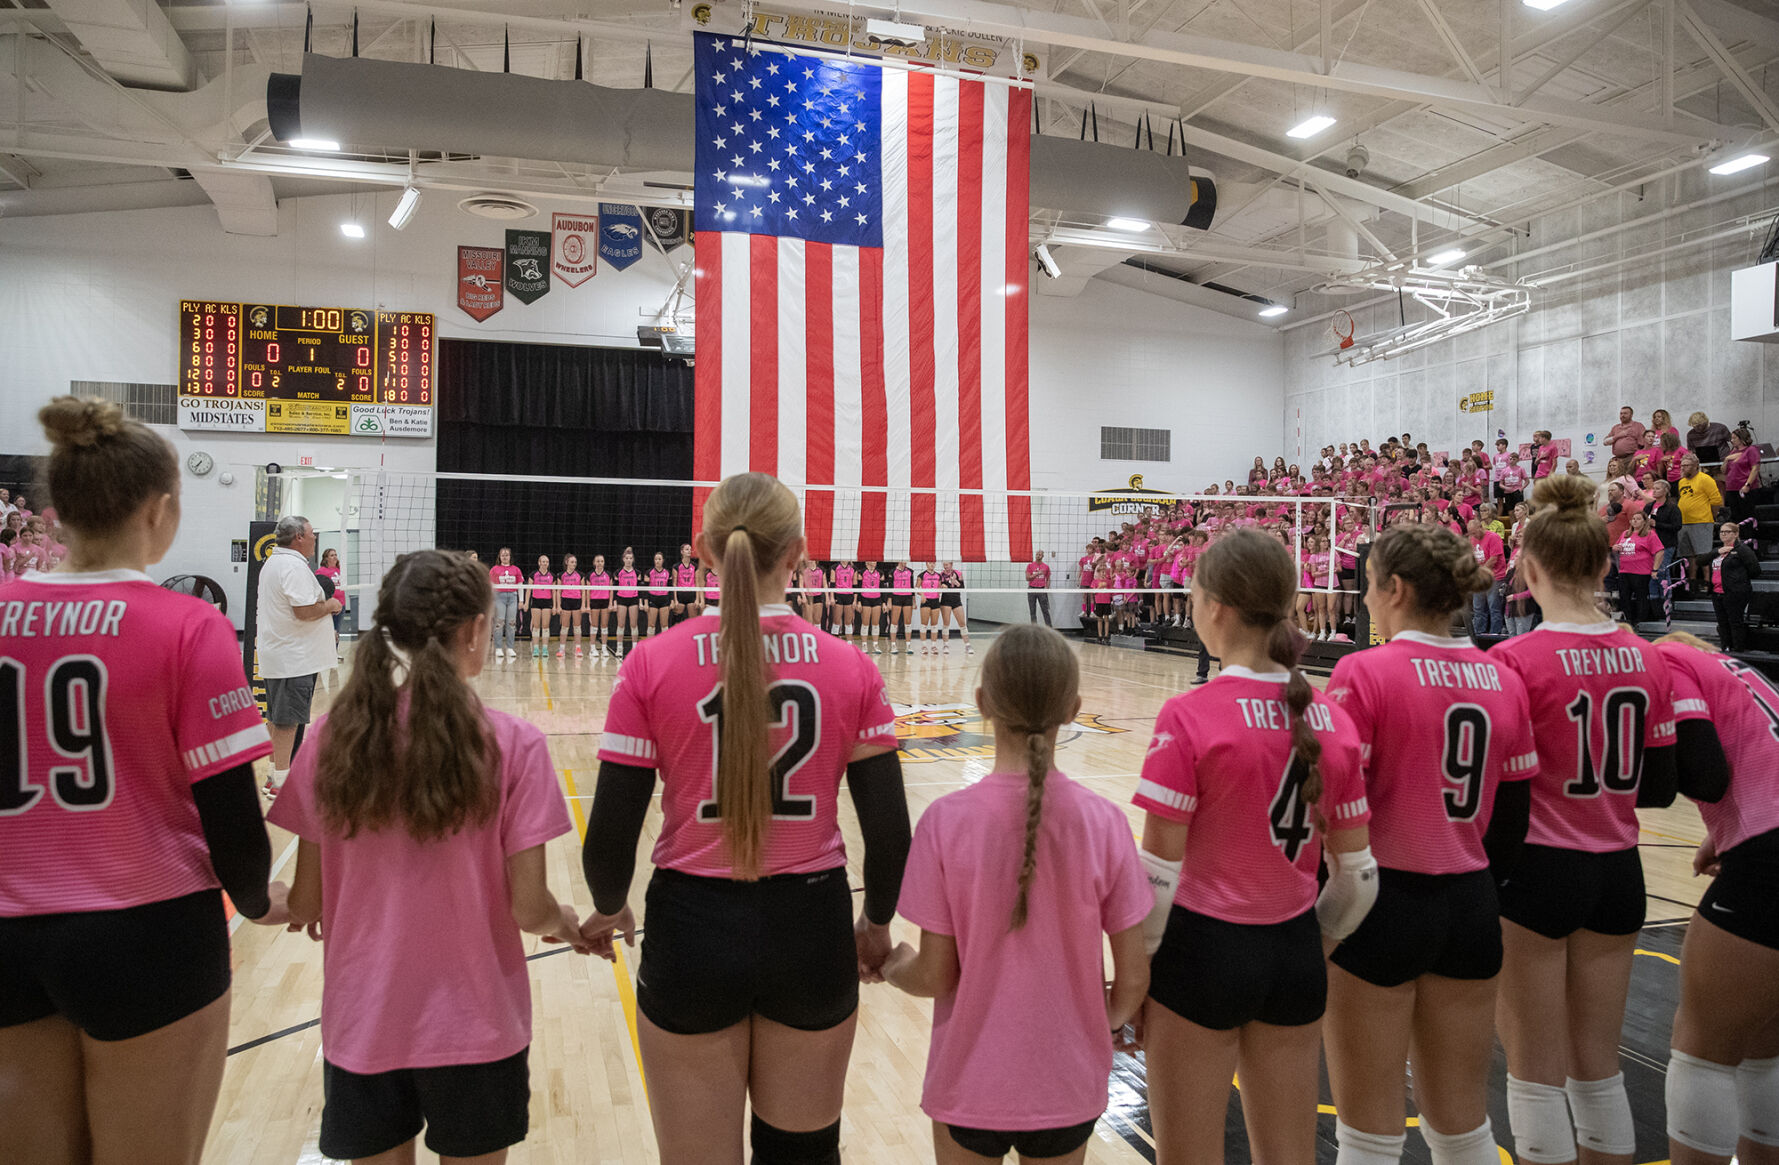 Tri-Center’s annual pink out night with Treynor raises money for American Cancer Society